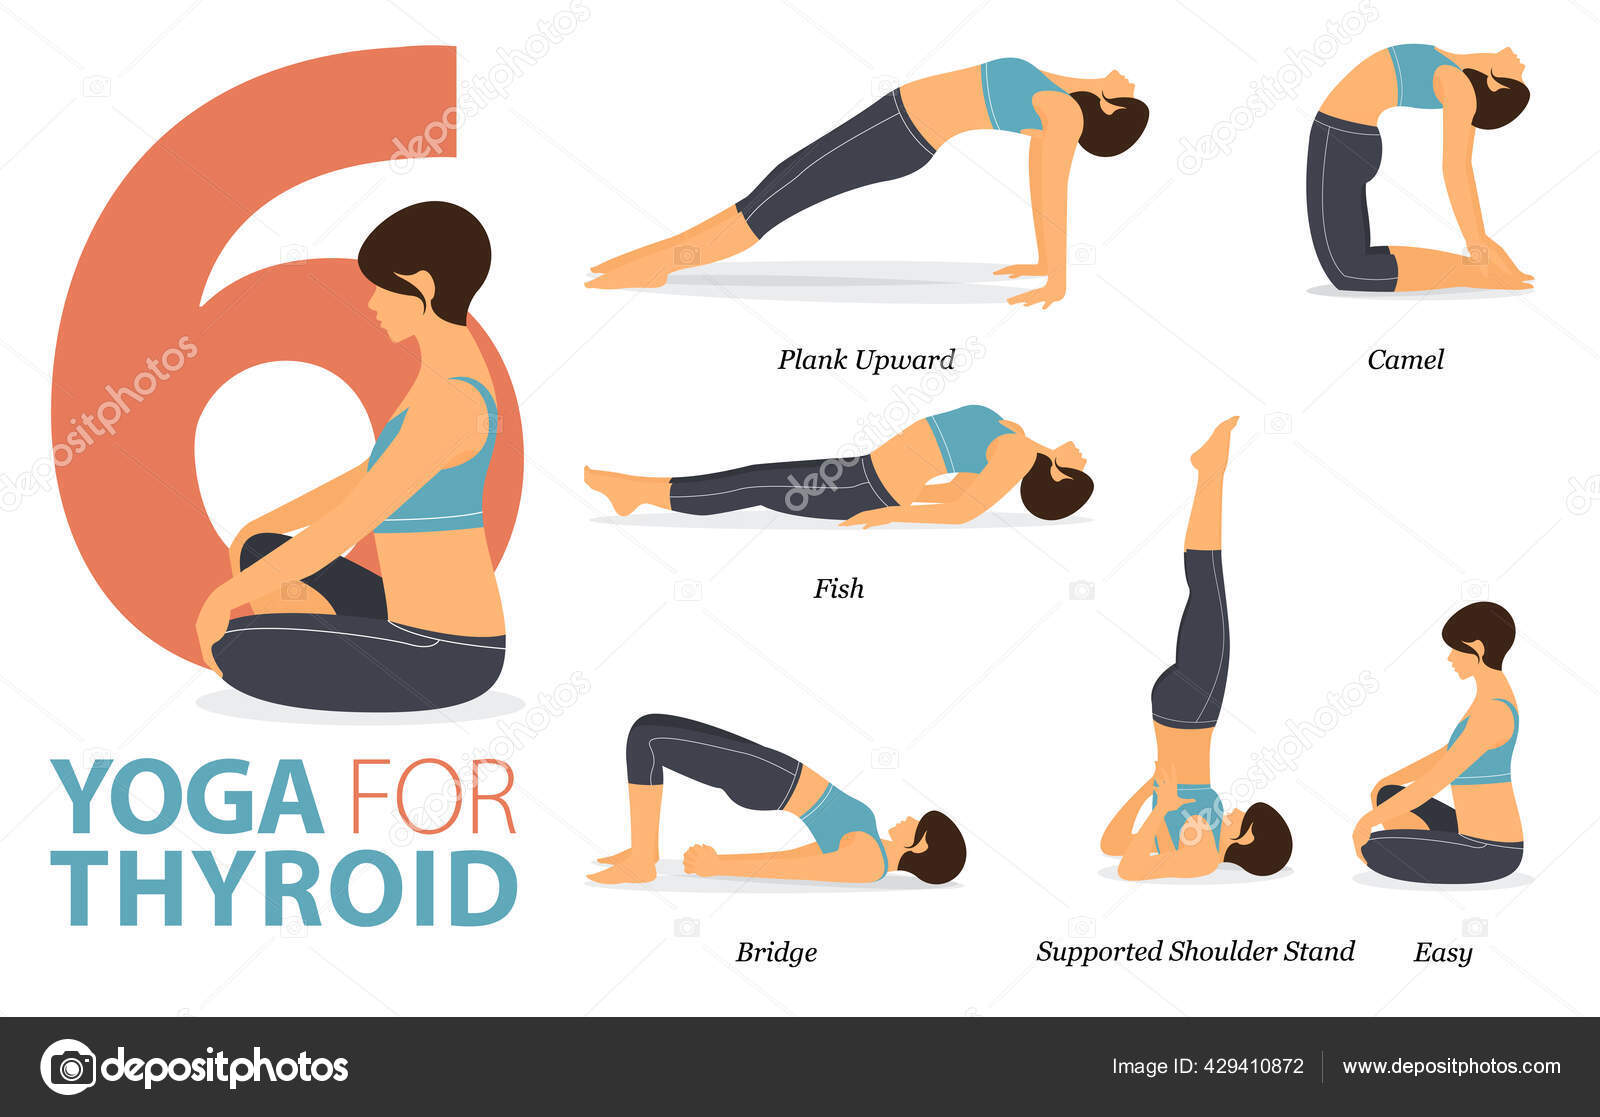 6 Best Yoga Poses to Improve Thyroid Health